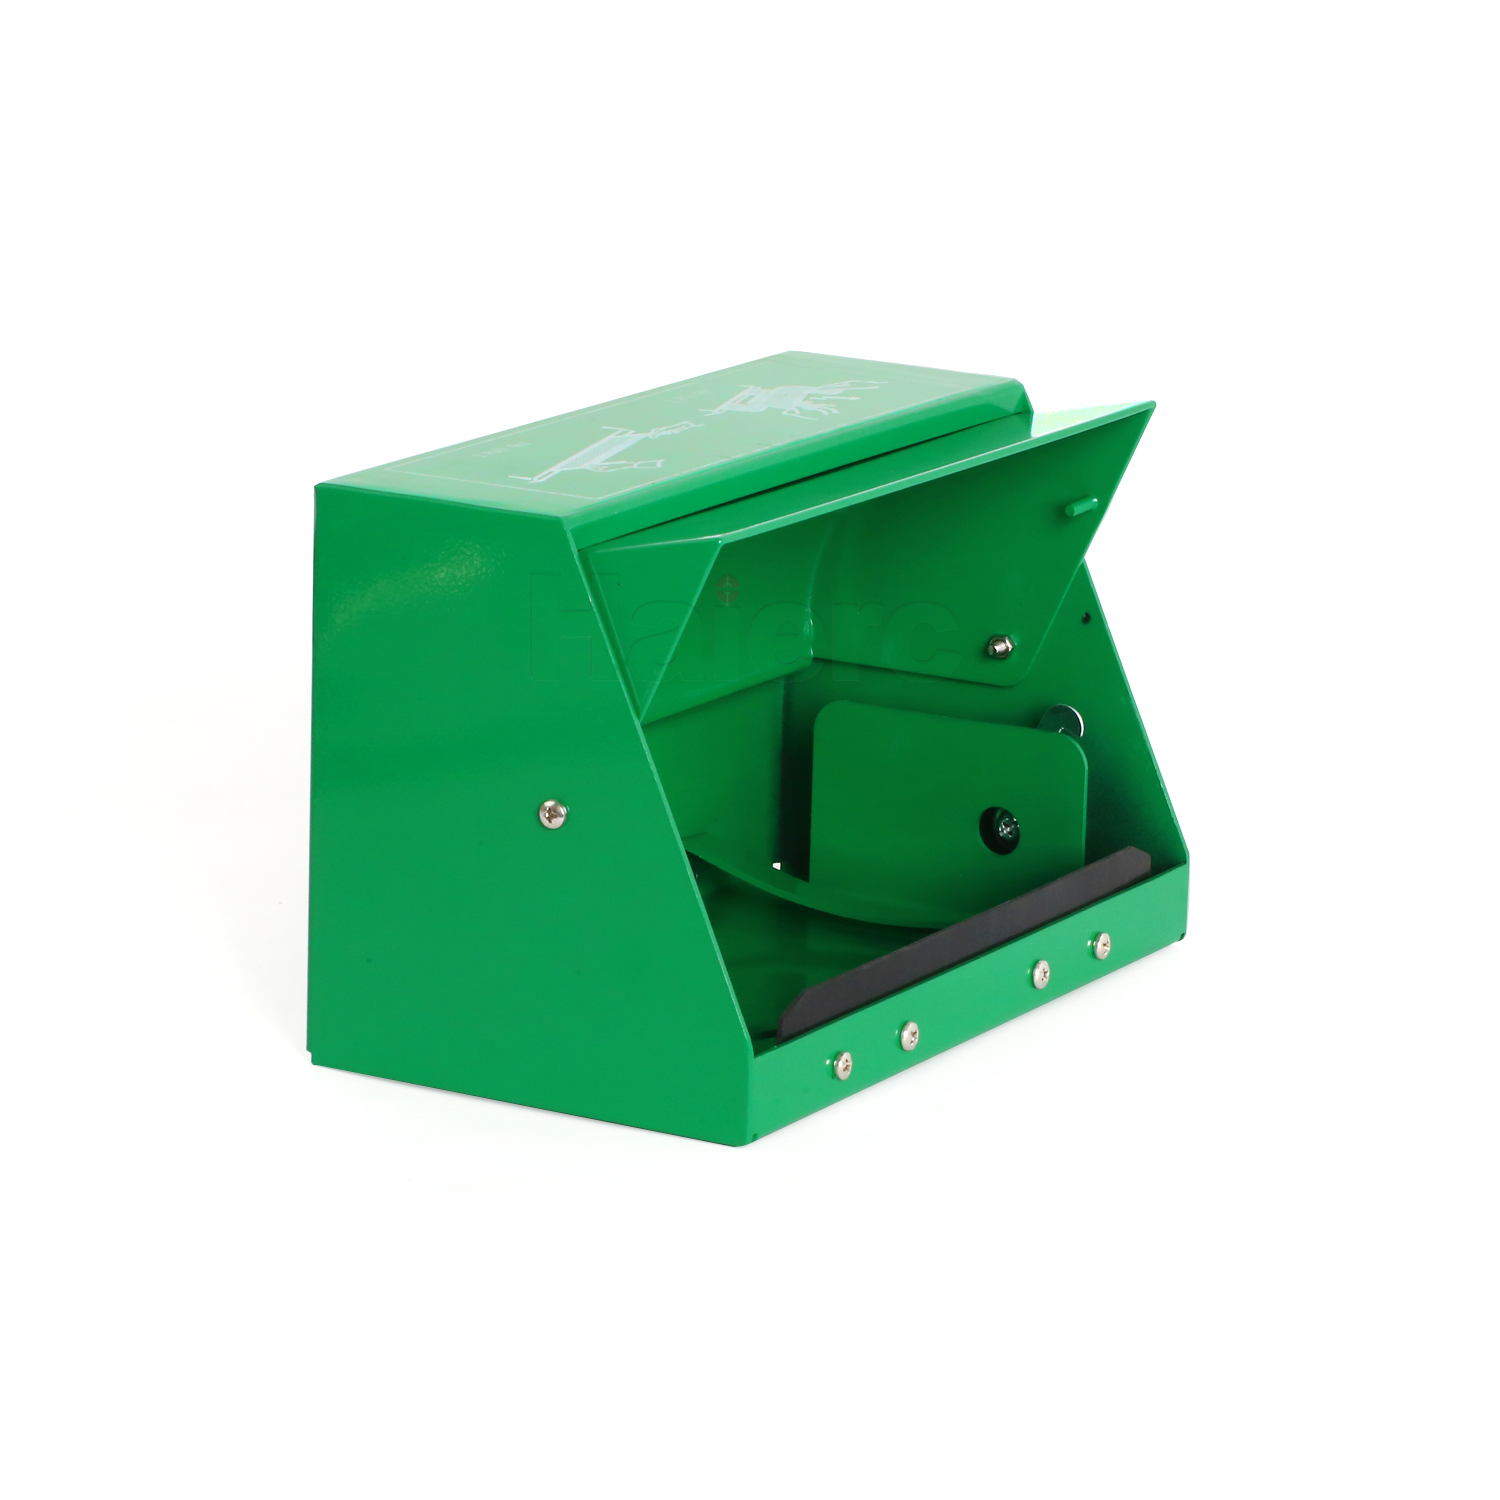 Haierc Outdoor Pet Waste Bag Dispenser for Yard Metal Waste Bag Dispenser Waterproof Waste Bag Sharing Box for Pet Waste Stations